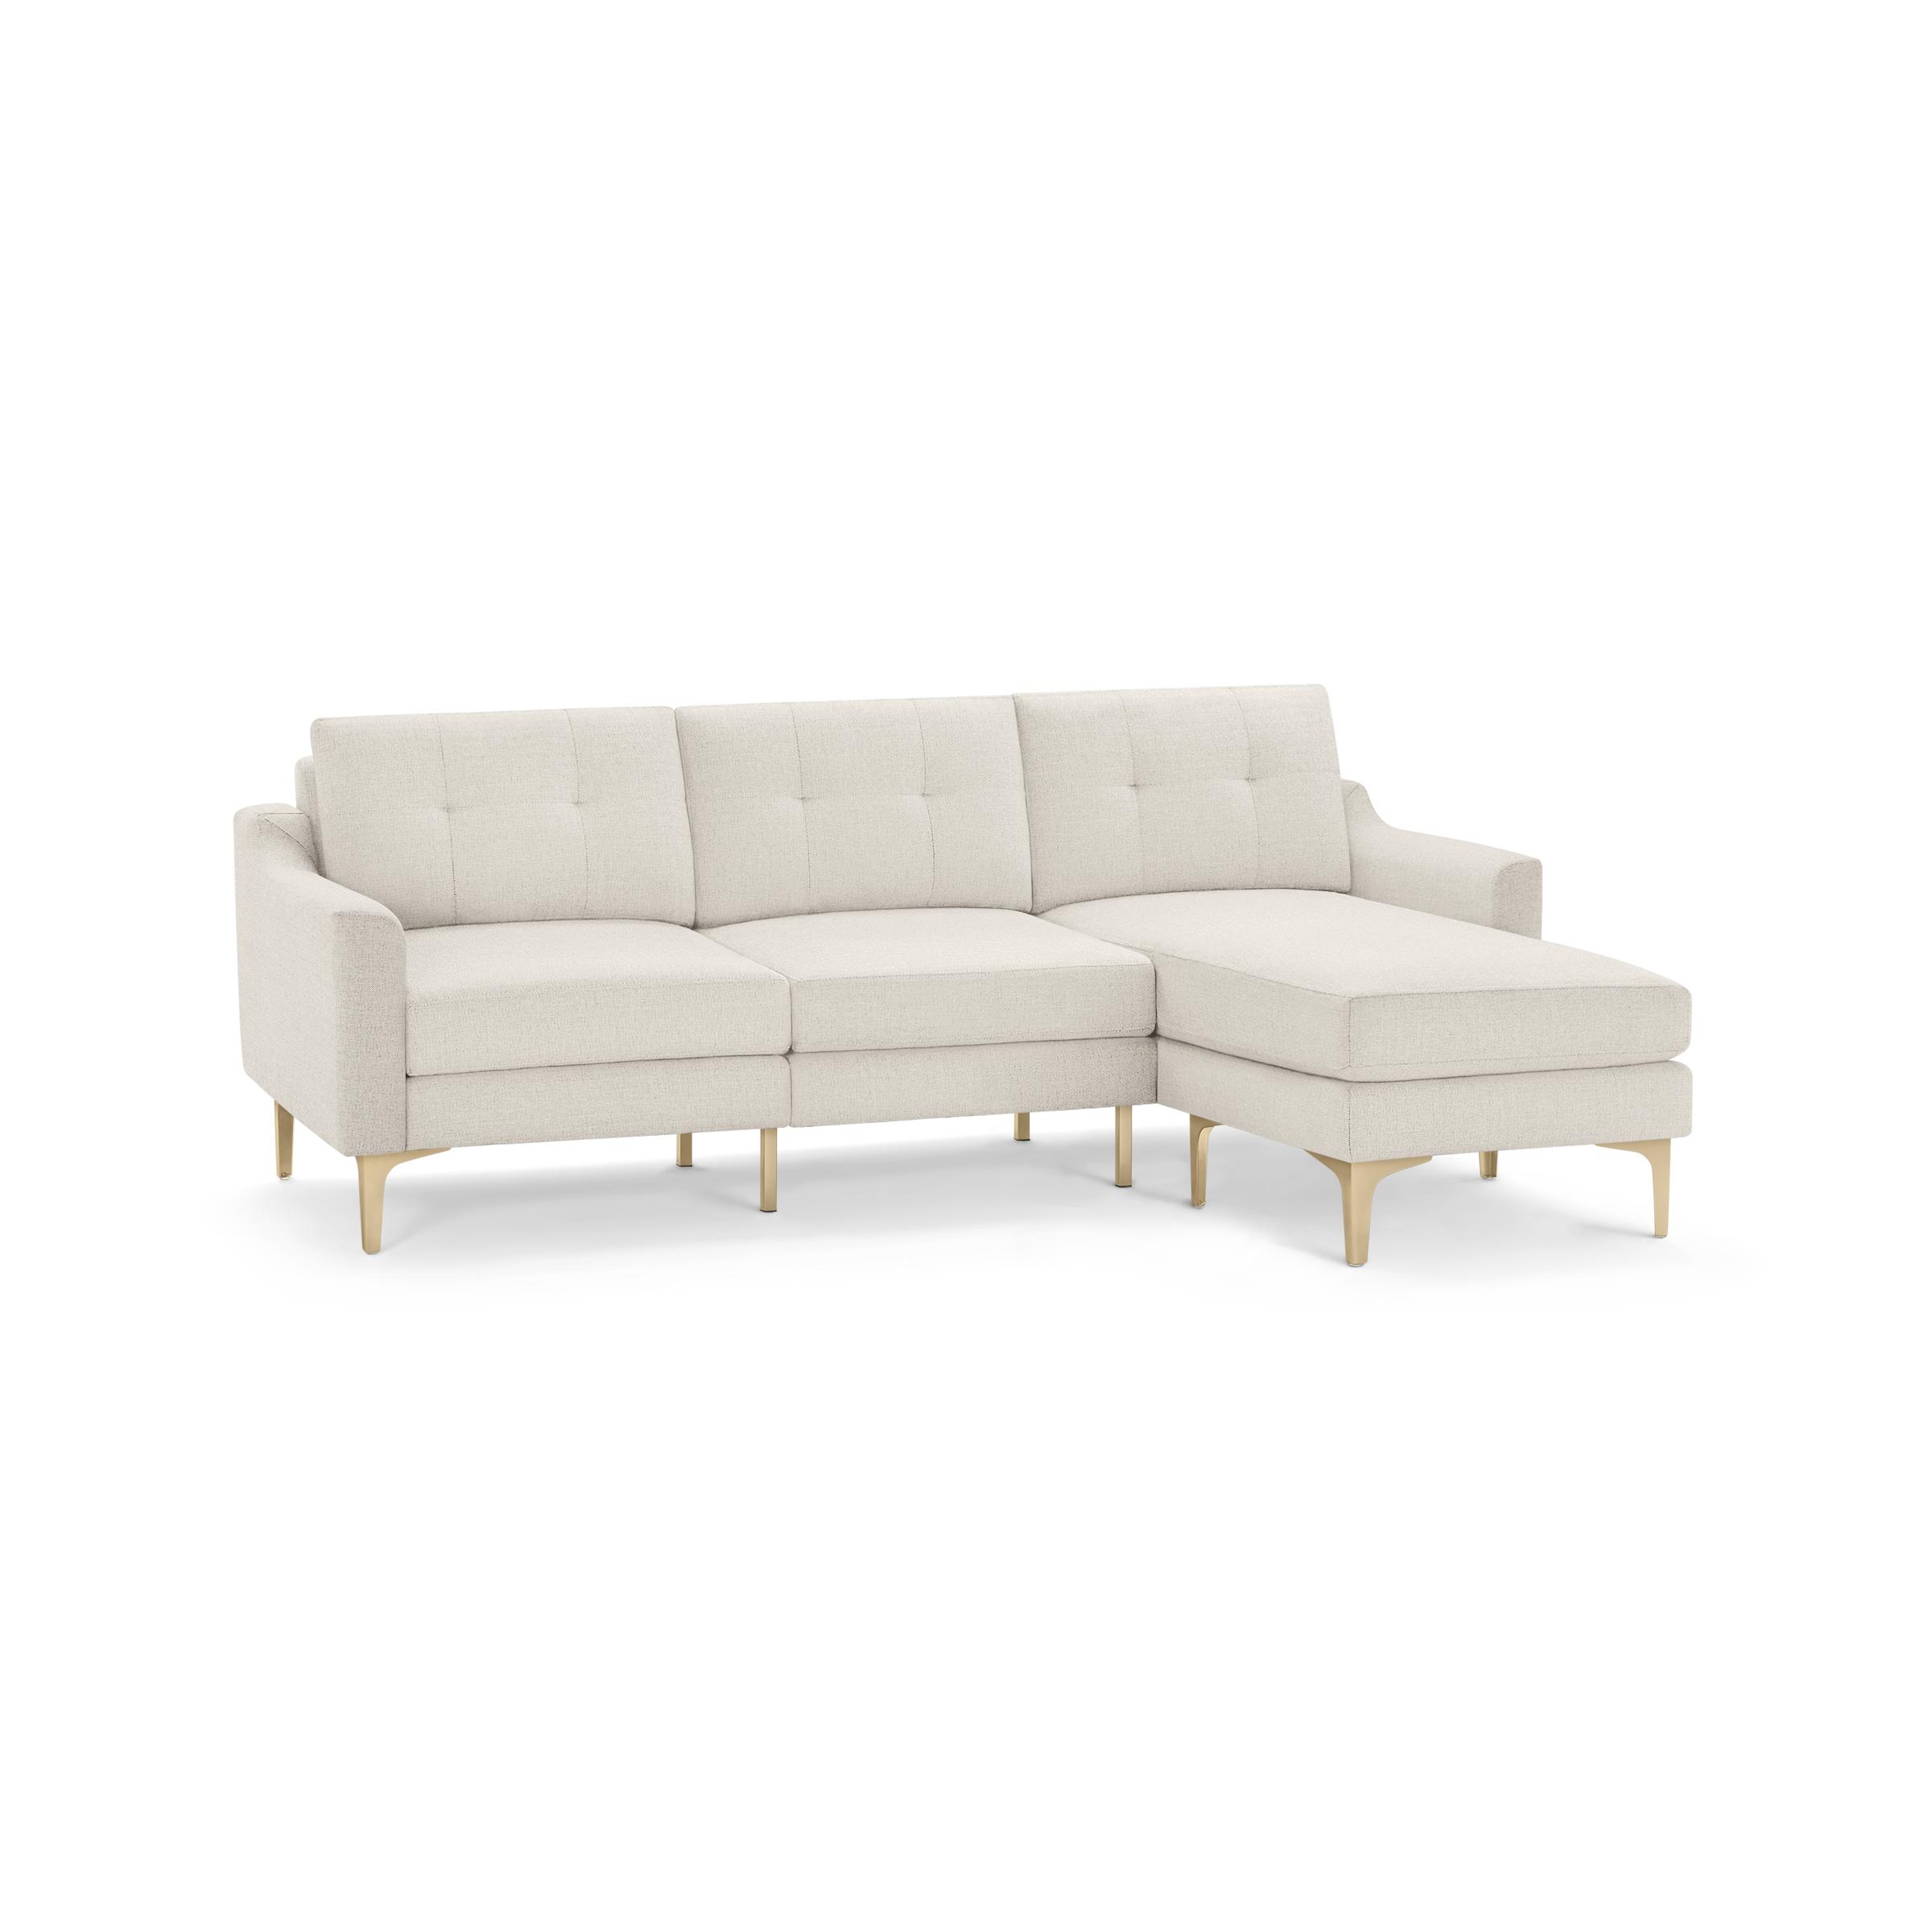 Nomad Sofa Sectional in Ivory, Brass Legs - Image 0